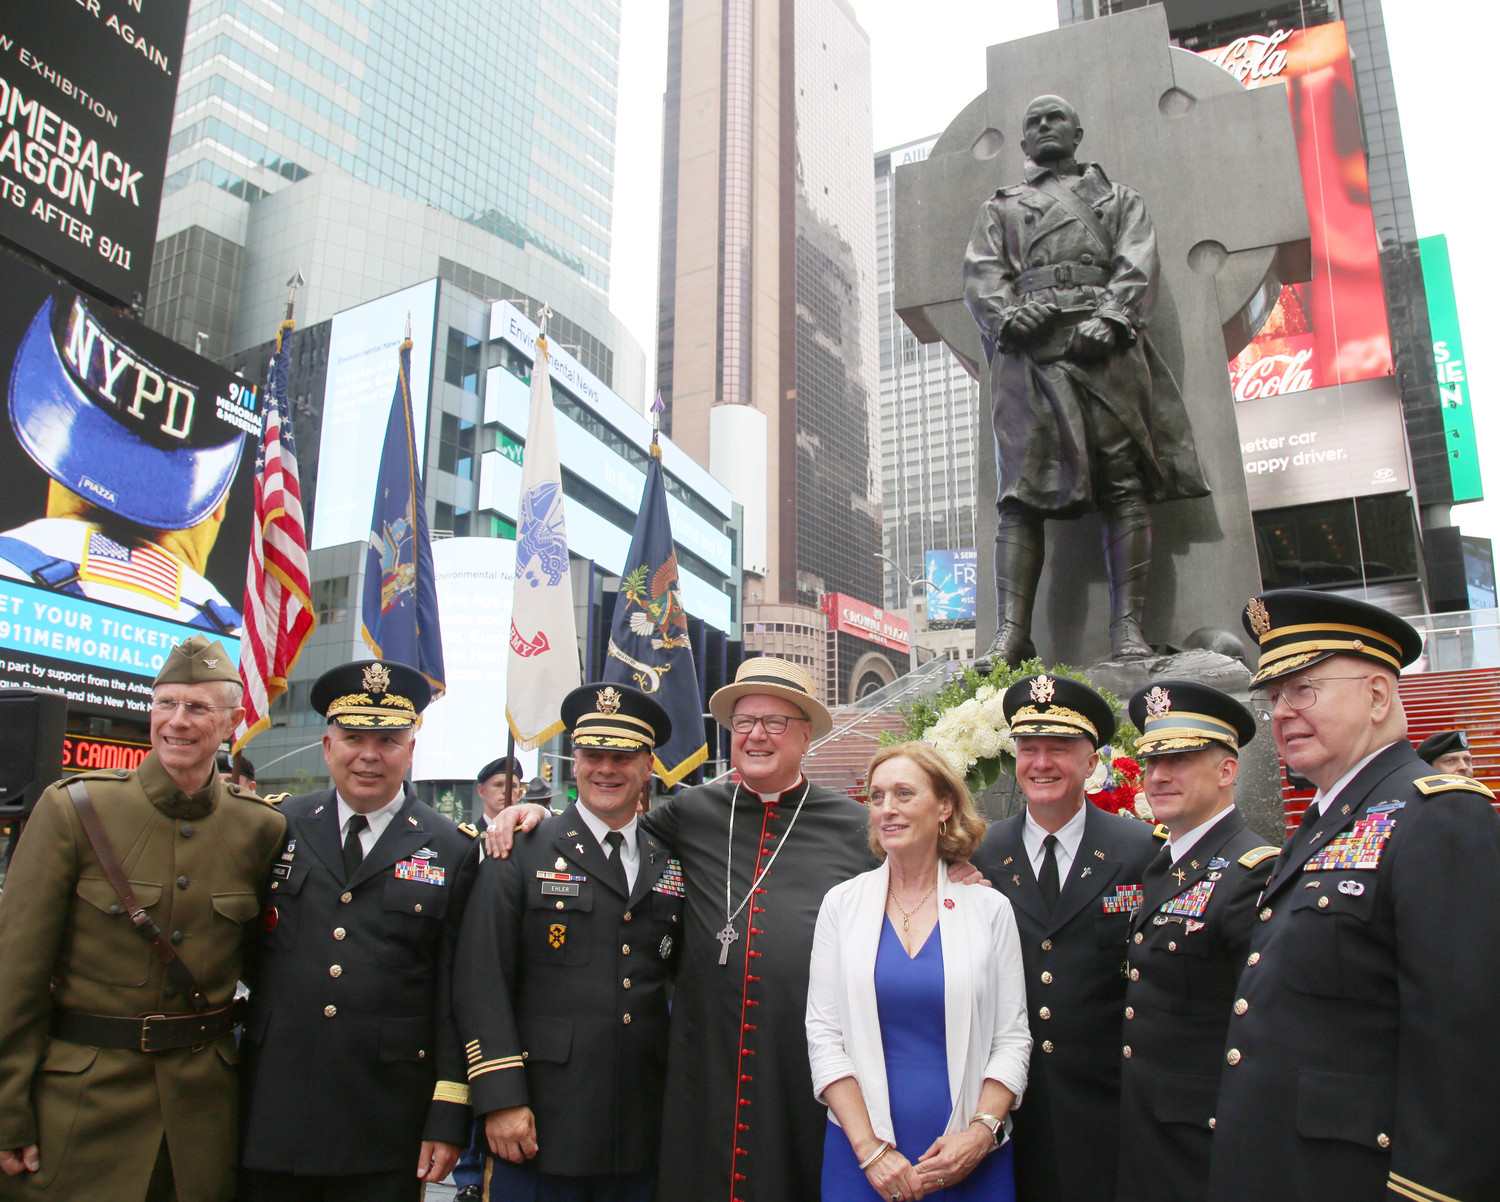 Cardinal Dolan joins military personnel and Dr. Libby O’Connell of the U.S. World War I Centennial Commission and the New York World War I Centennial Committee following a wreath laying ceremony June 27 at Father Duffy Square in Manhattan’s Times Square. Behind them is the iconic statue of the renowned military chaplain who was a priest of the archdiocese.